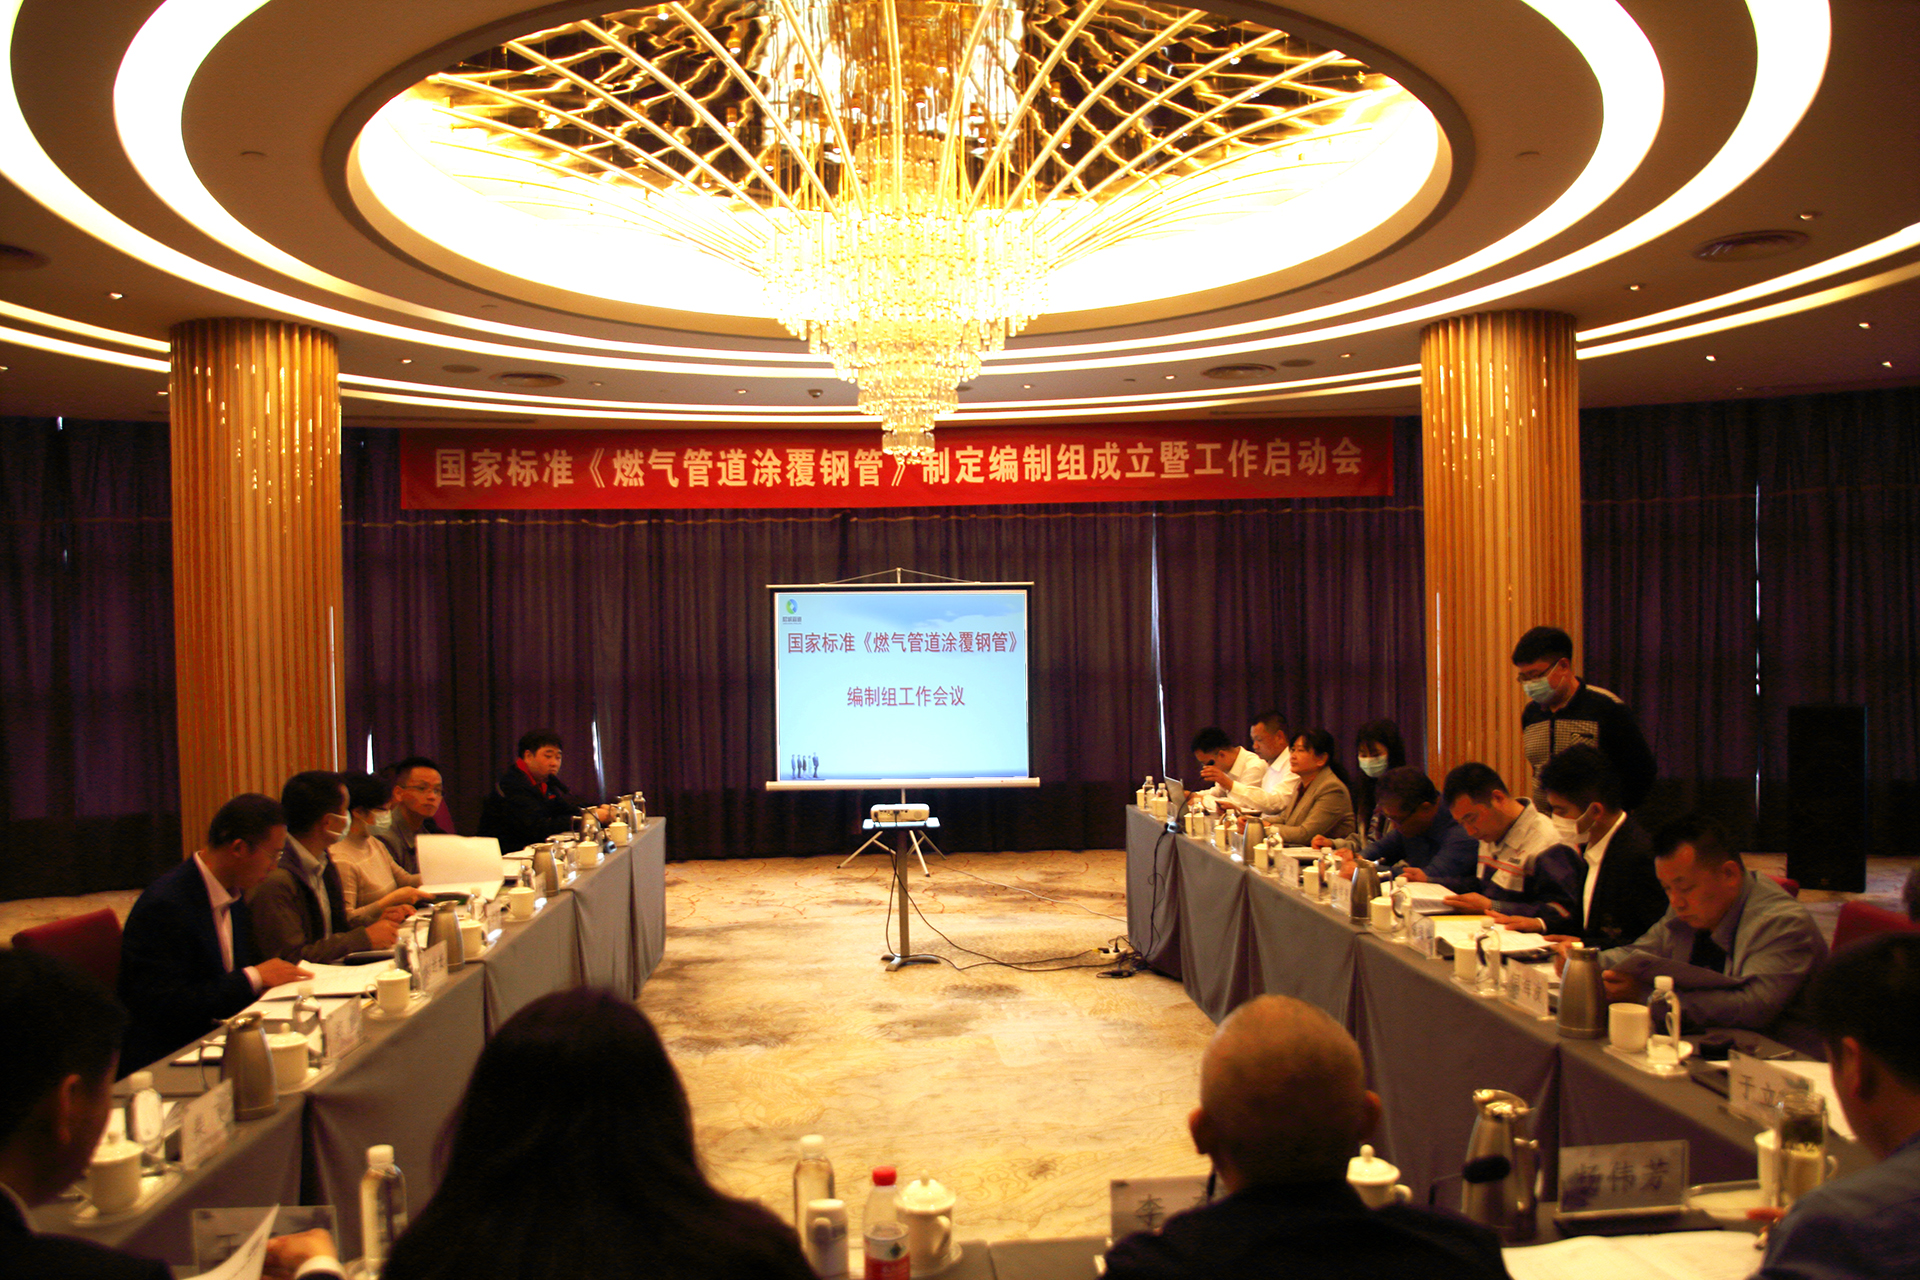 The preparation group of national standard "Coated Steel Pipe for Gas Pipeline" was established and the work kick-off meeting was held successfully